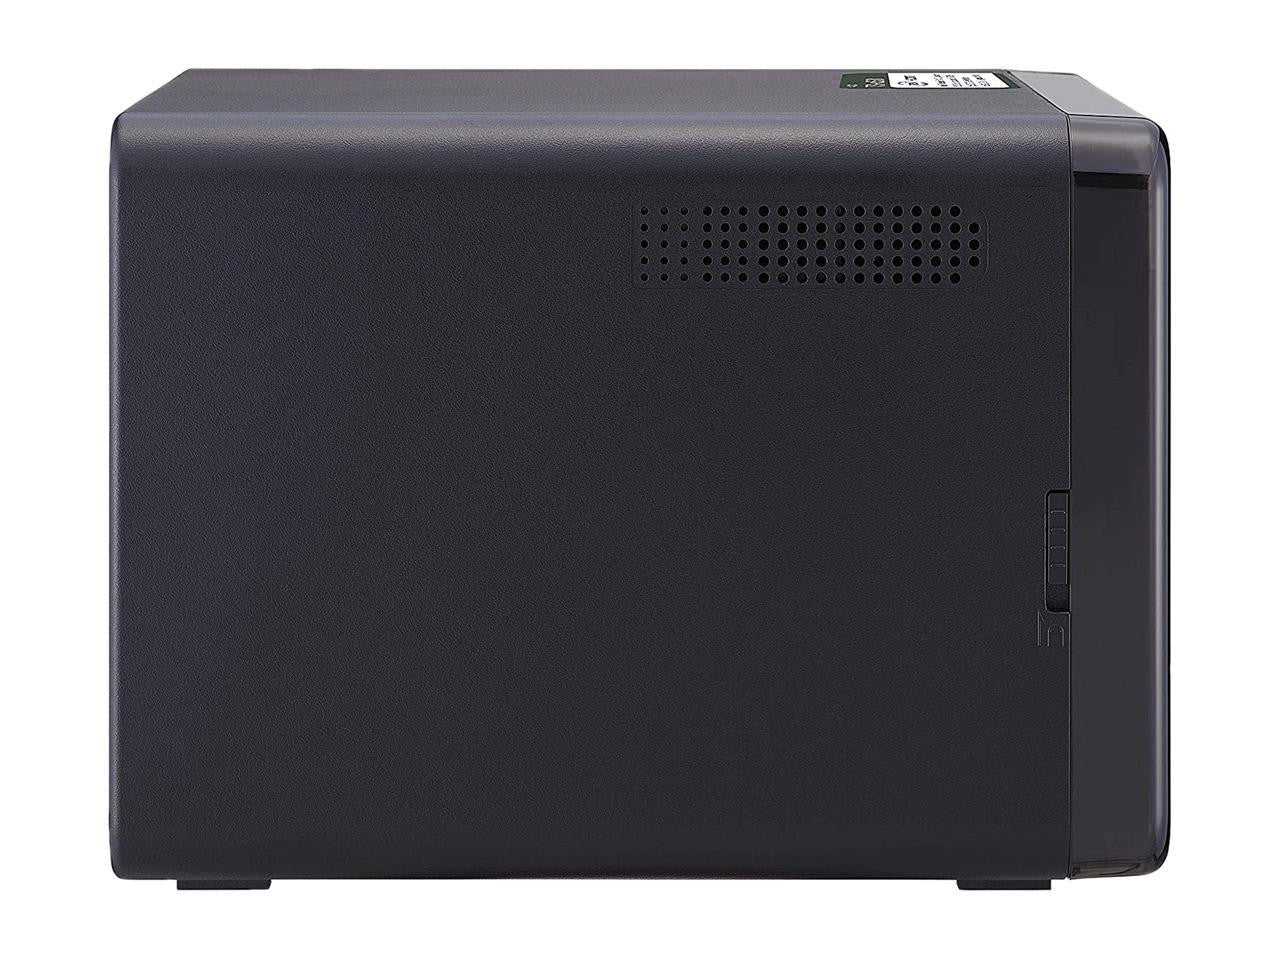 QNAP TS-253D Quad Core 2.7Ghz 2-Bay NAS with 4GB RAM and 4TB (2 x 2TB) of Seagate Ironwolf NAS Drives Fully Assembled and Tested By CustomTechSales